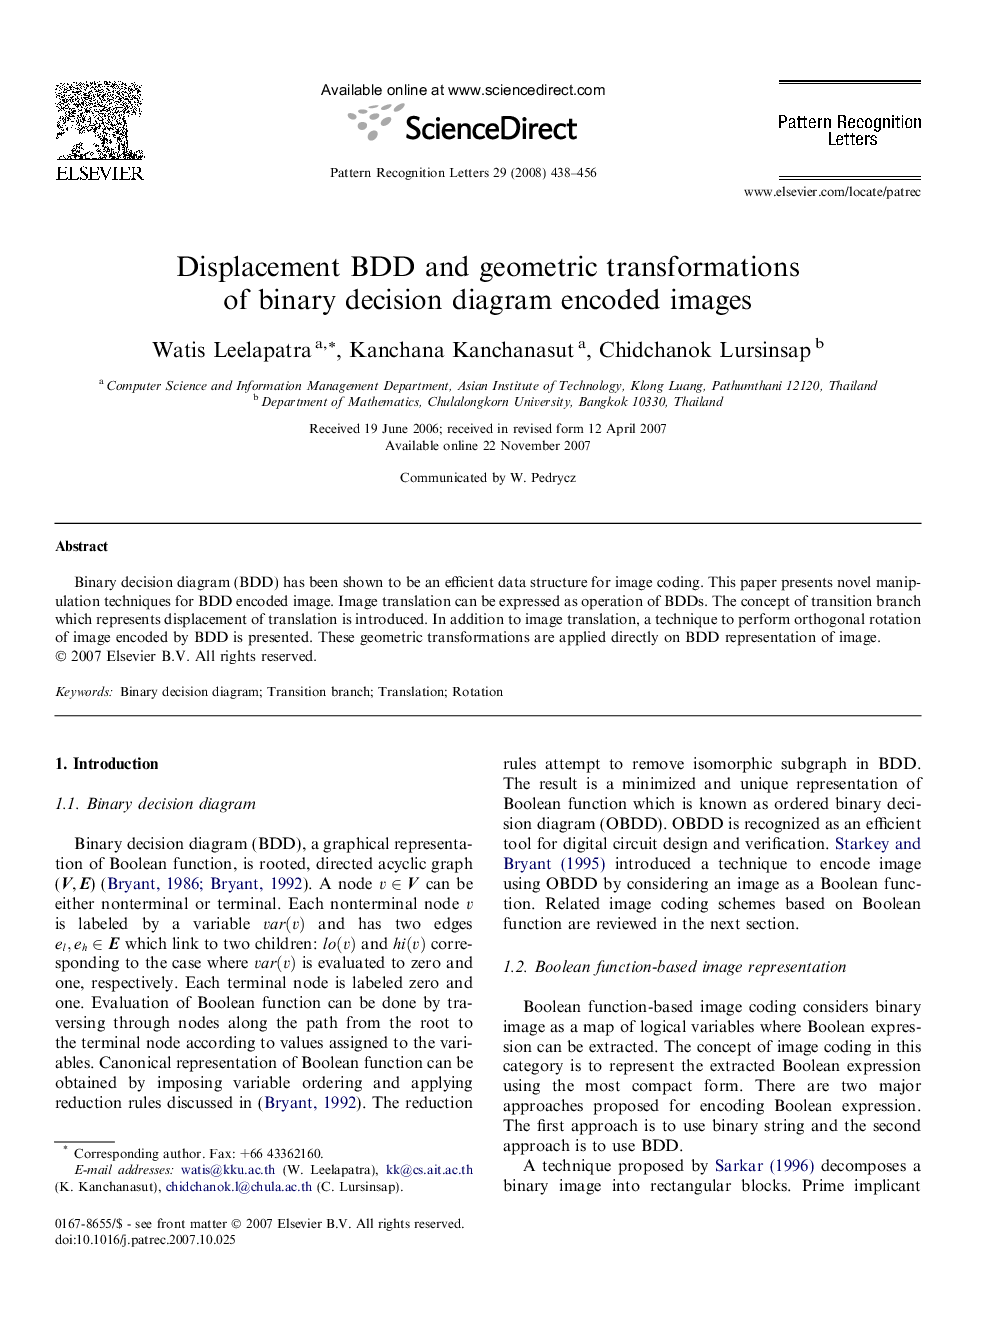 Displacement BDD and geometric transformations of binary decision diagram encoded images